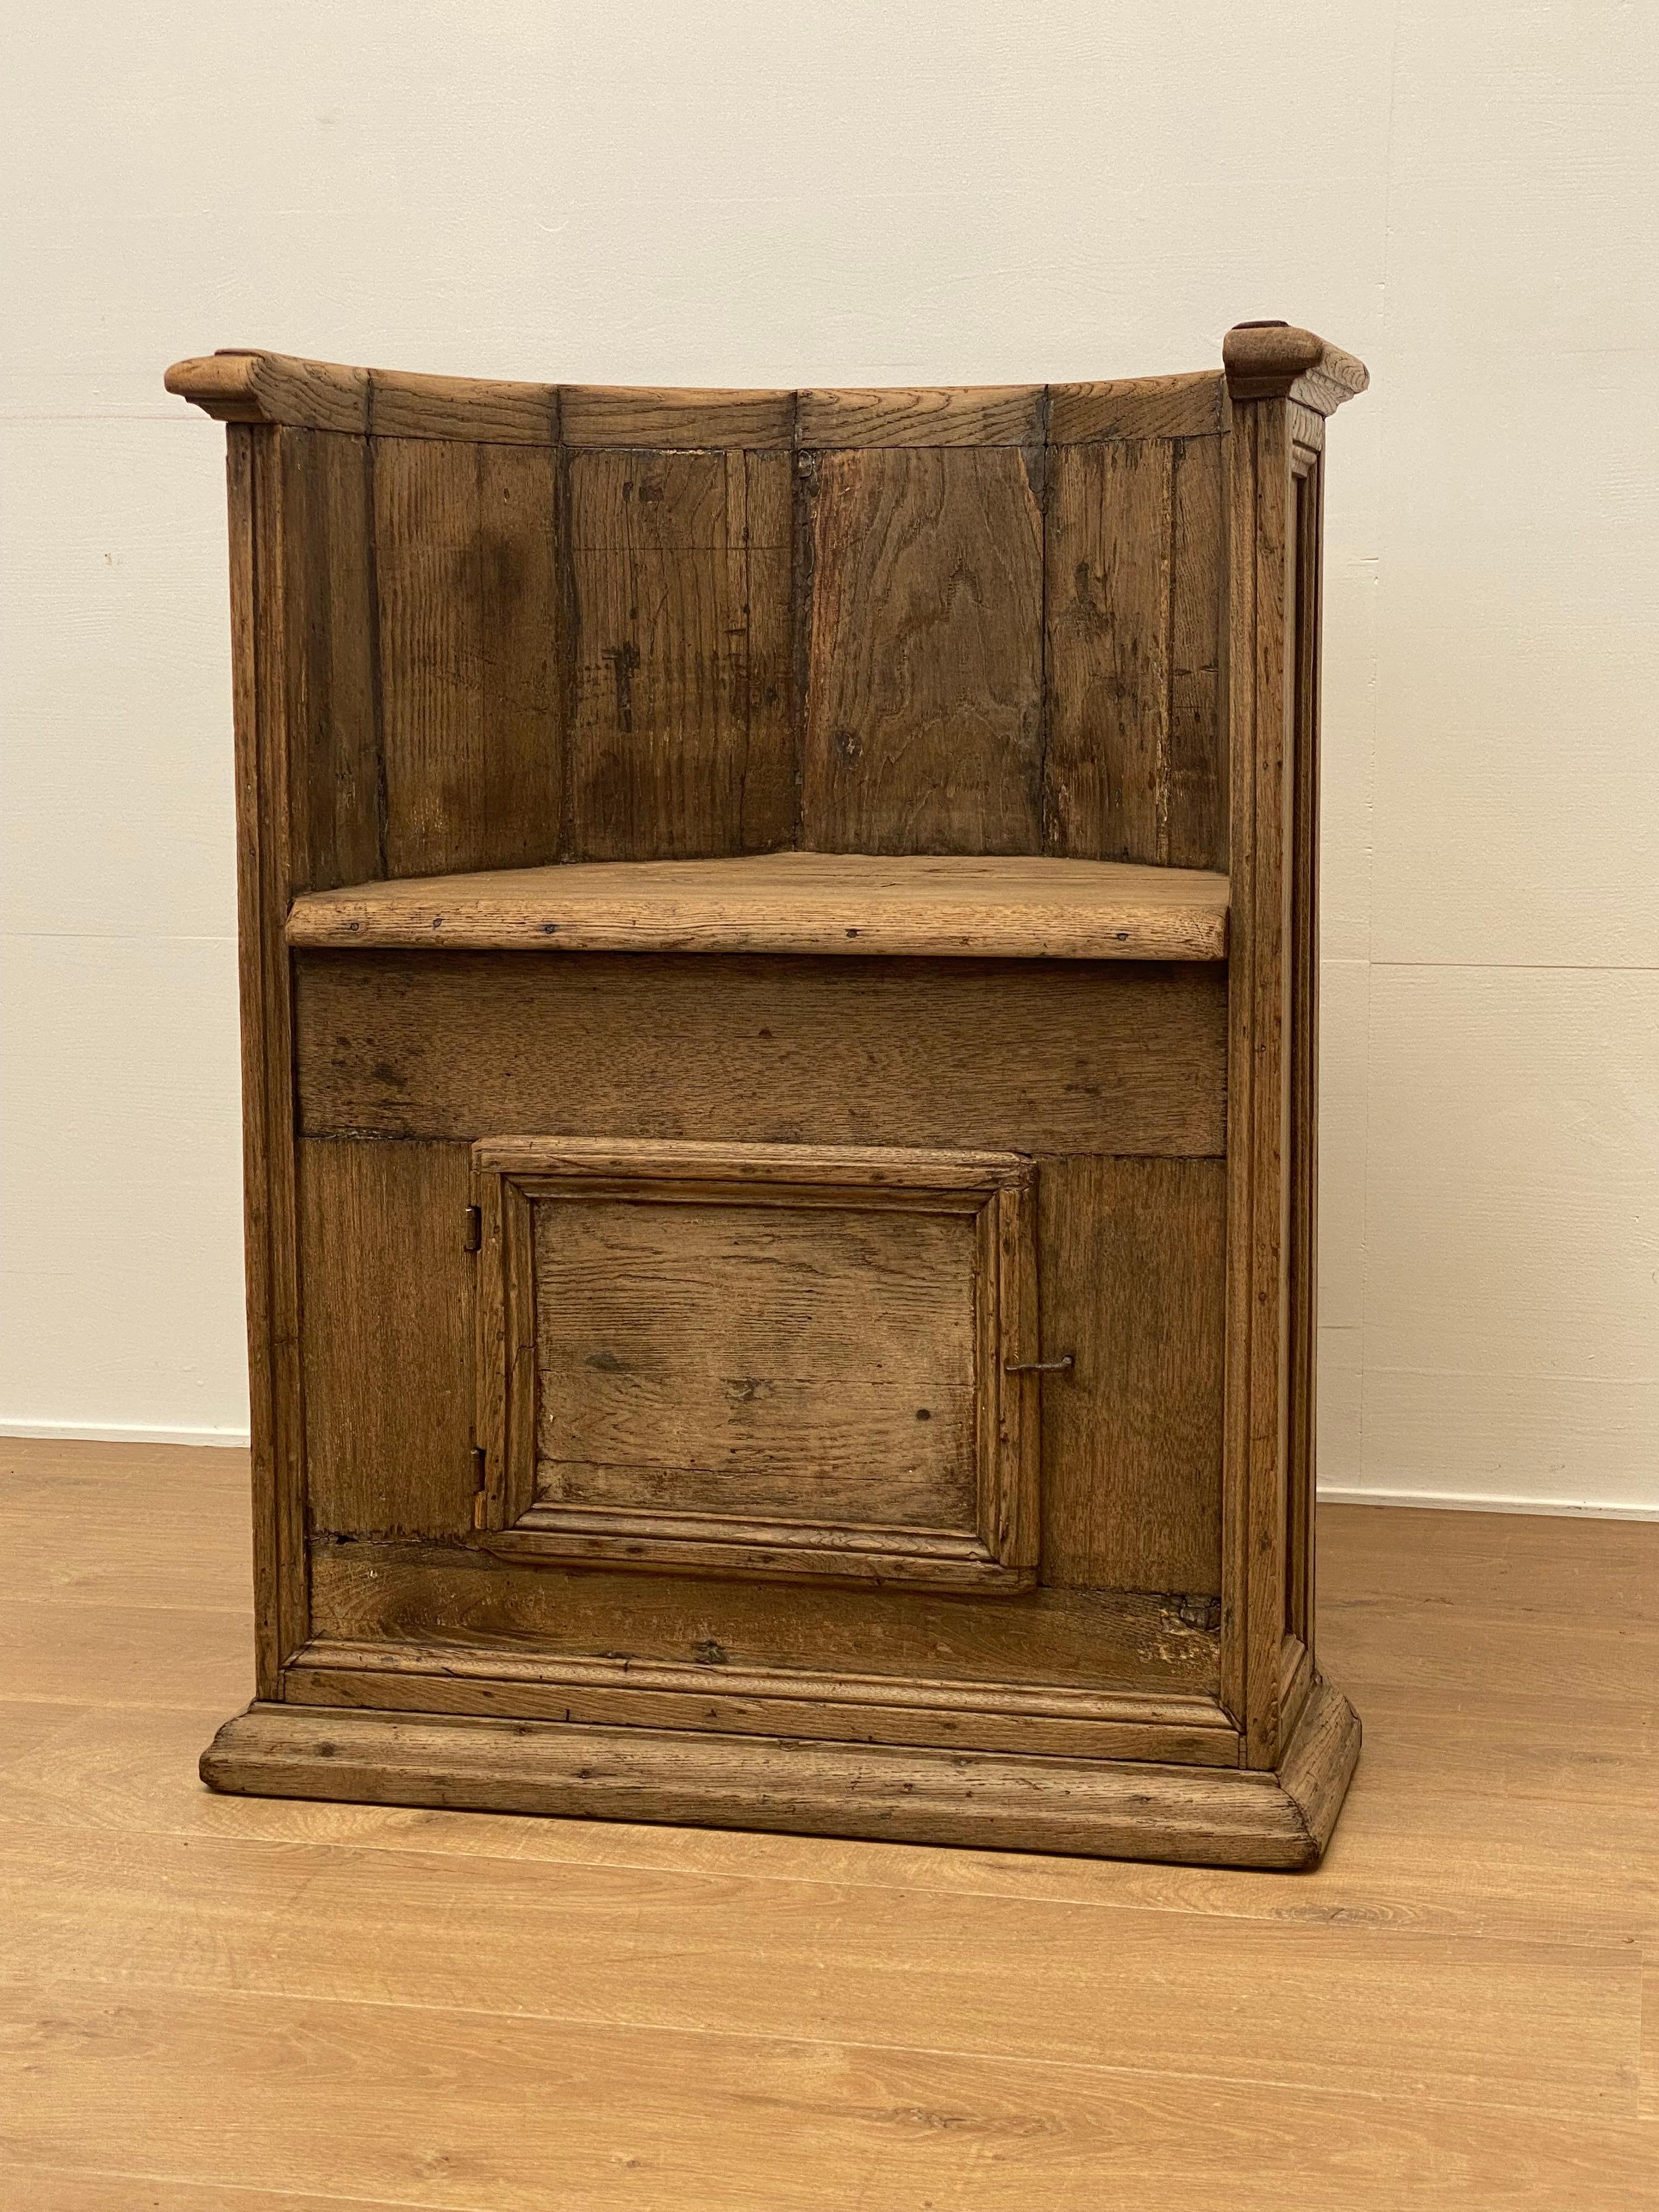 An exceptional antique Italian Chair from a church from the 17th Century,
the bleached Oak has a beautiful bleached patina and shine,
the chair has a very exceptional shape and there is a little door in the front of
the chair to store things,
very